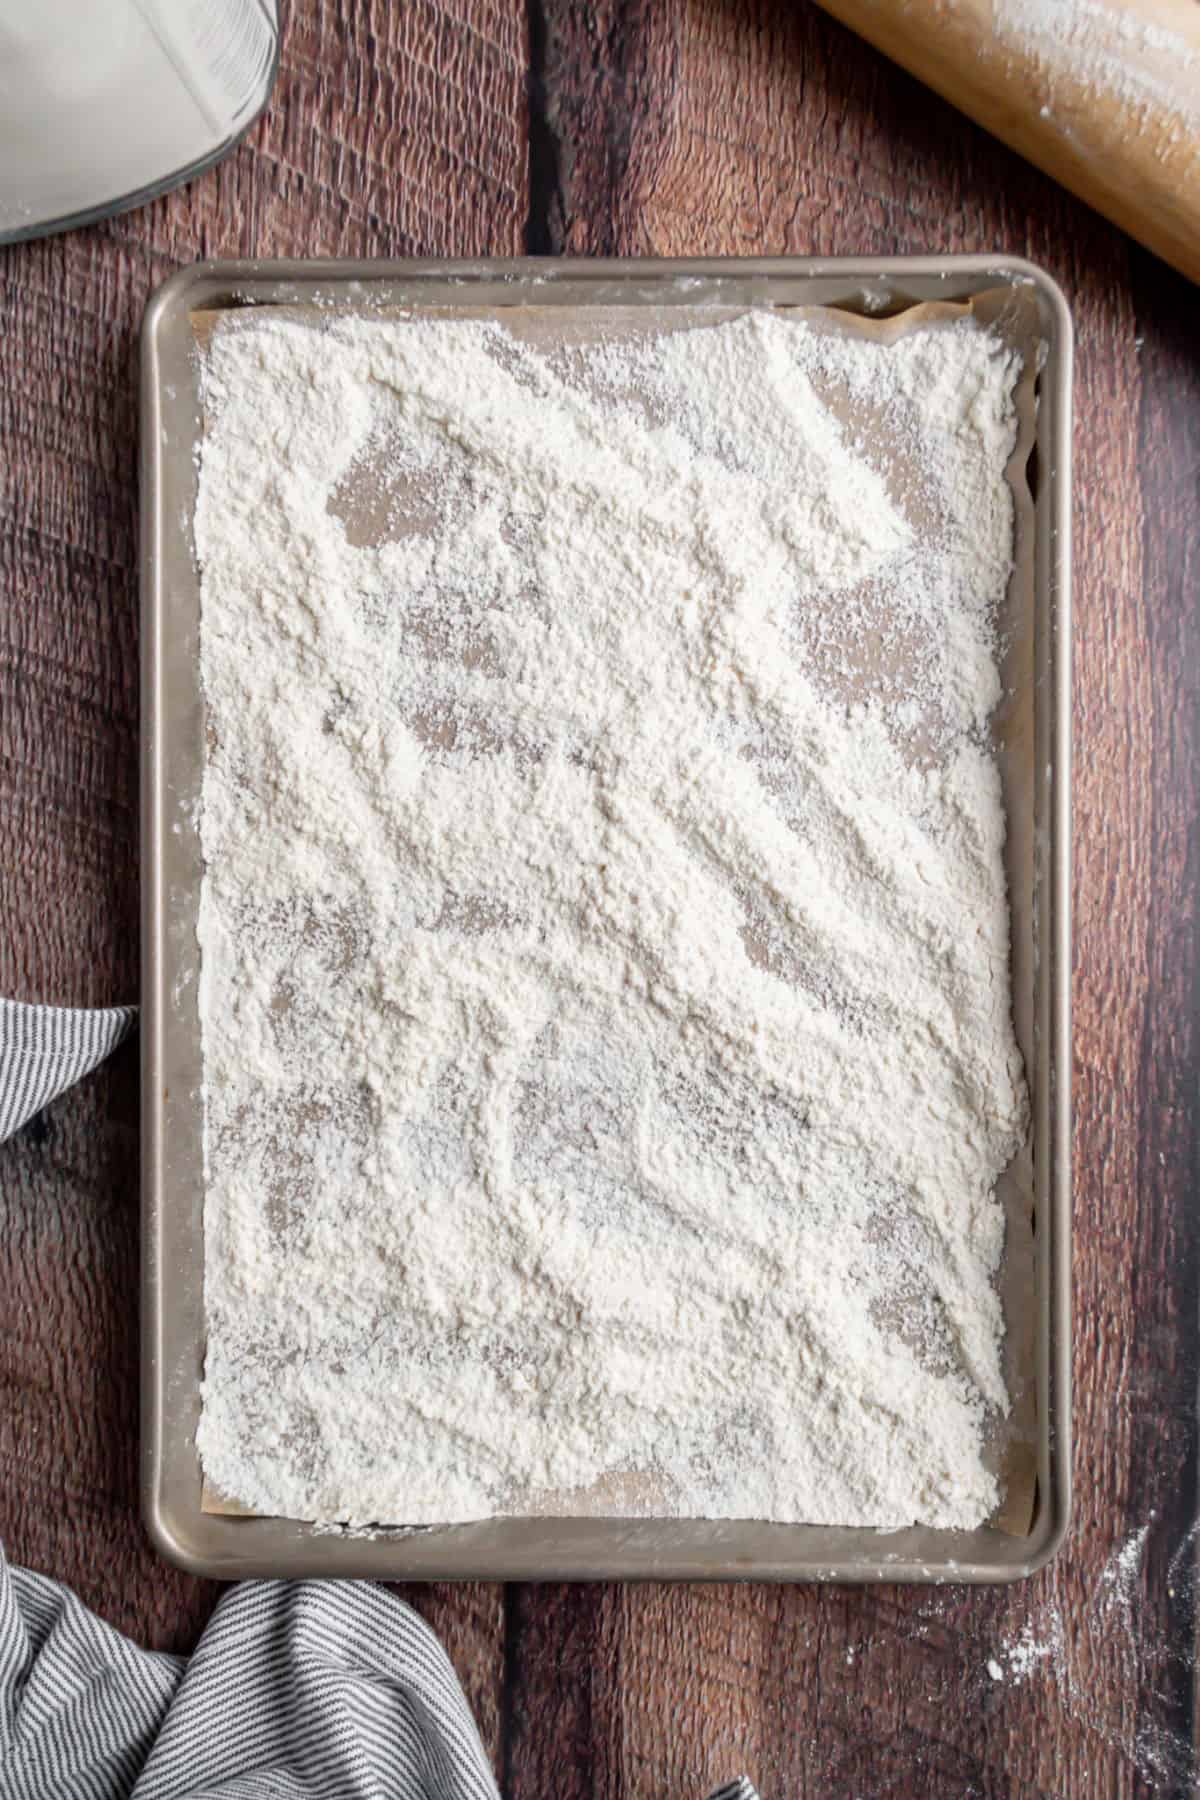 Metal cookie sheet covered with flour to bake.